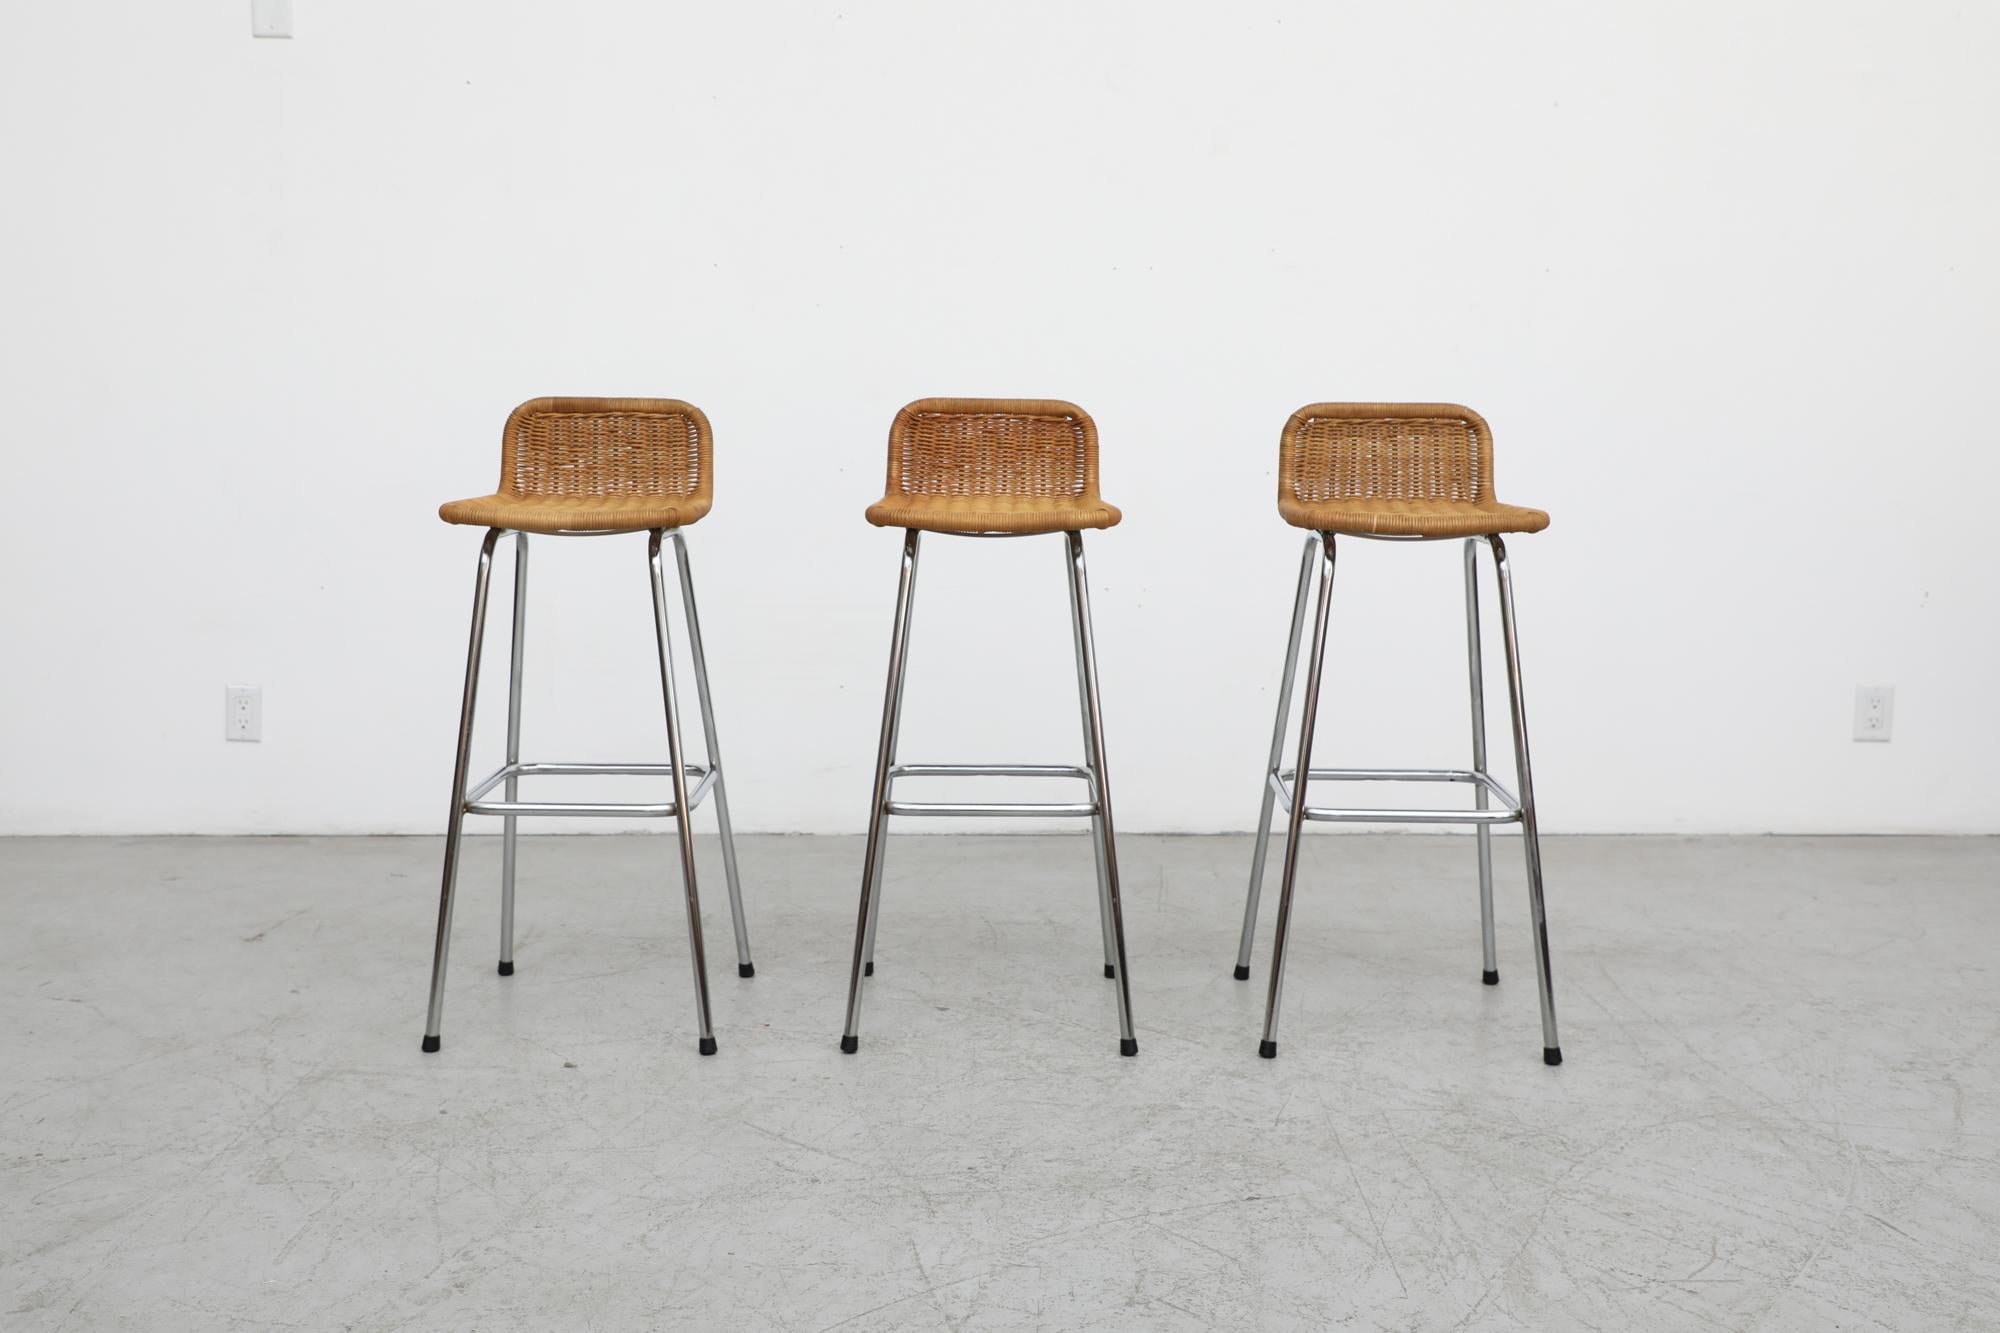 Charlotte Perriand style rattan bar stools by Dutch designer Dirk van Sliedregt for Rohe Noordwolde with low, rounded seat backs and chrome tubular frames. Seat height is 30